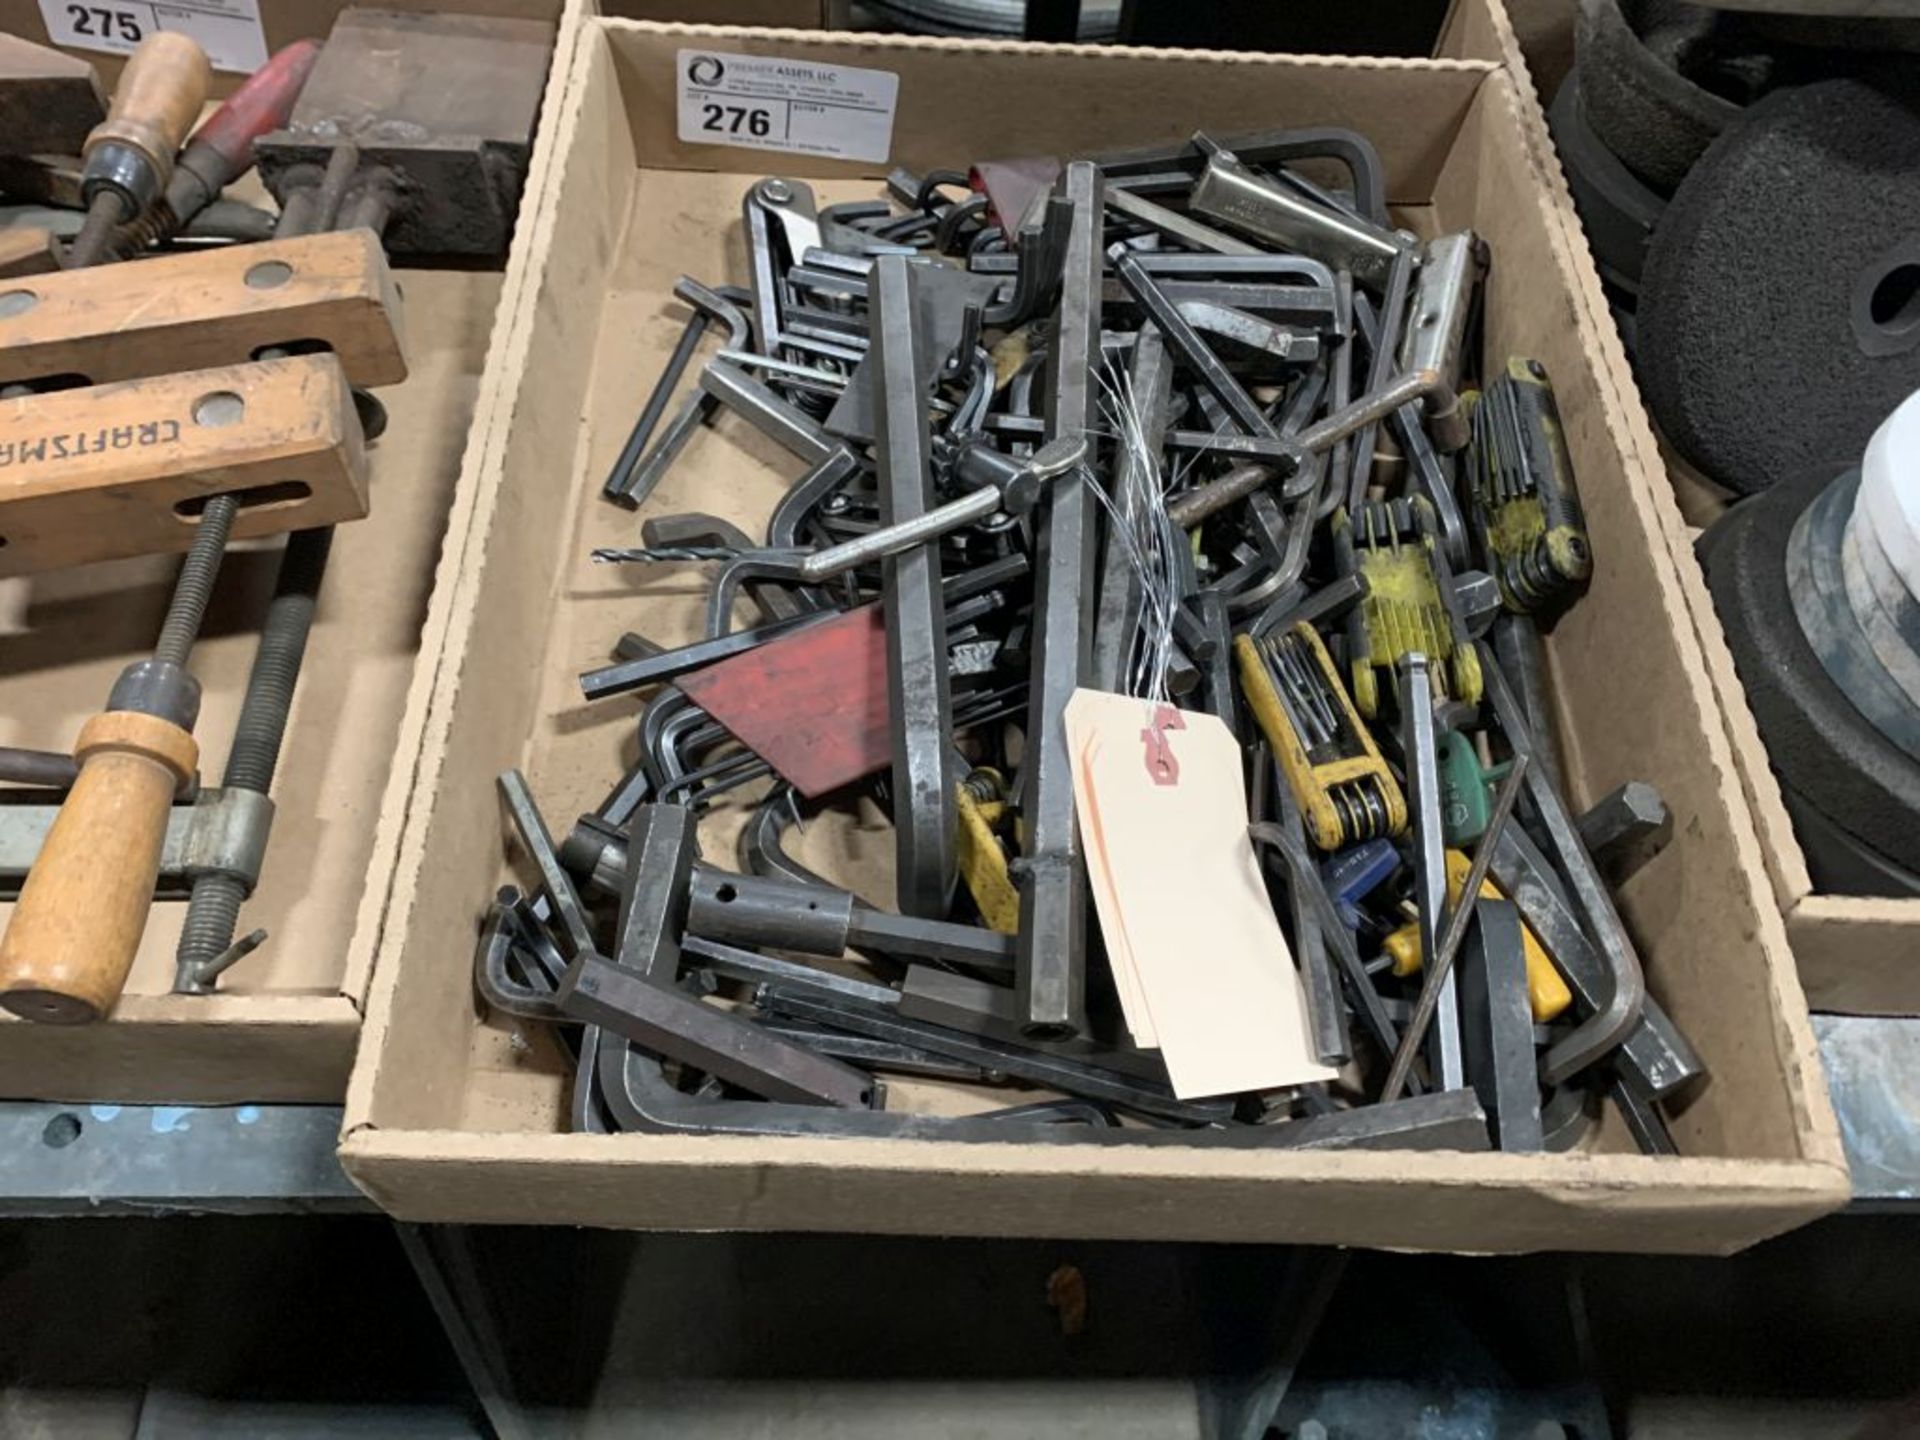 assortment of Allen wrenches